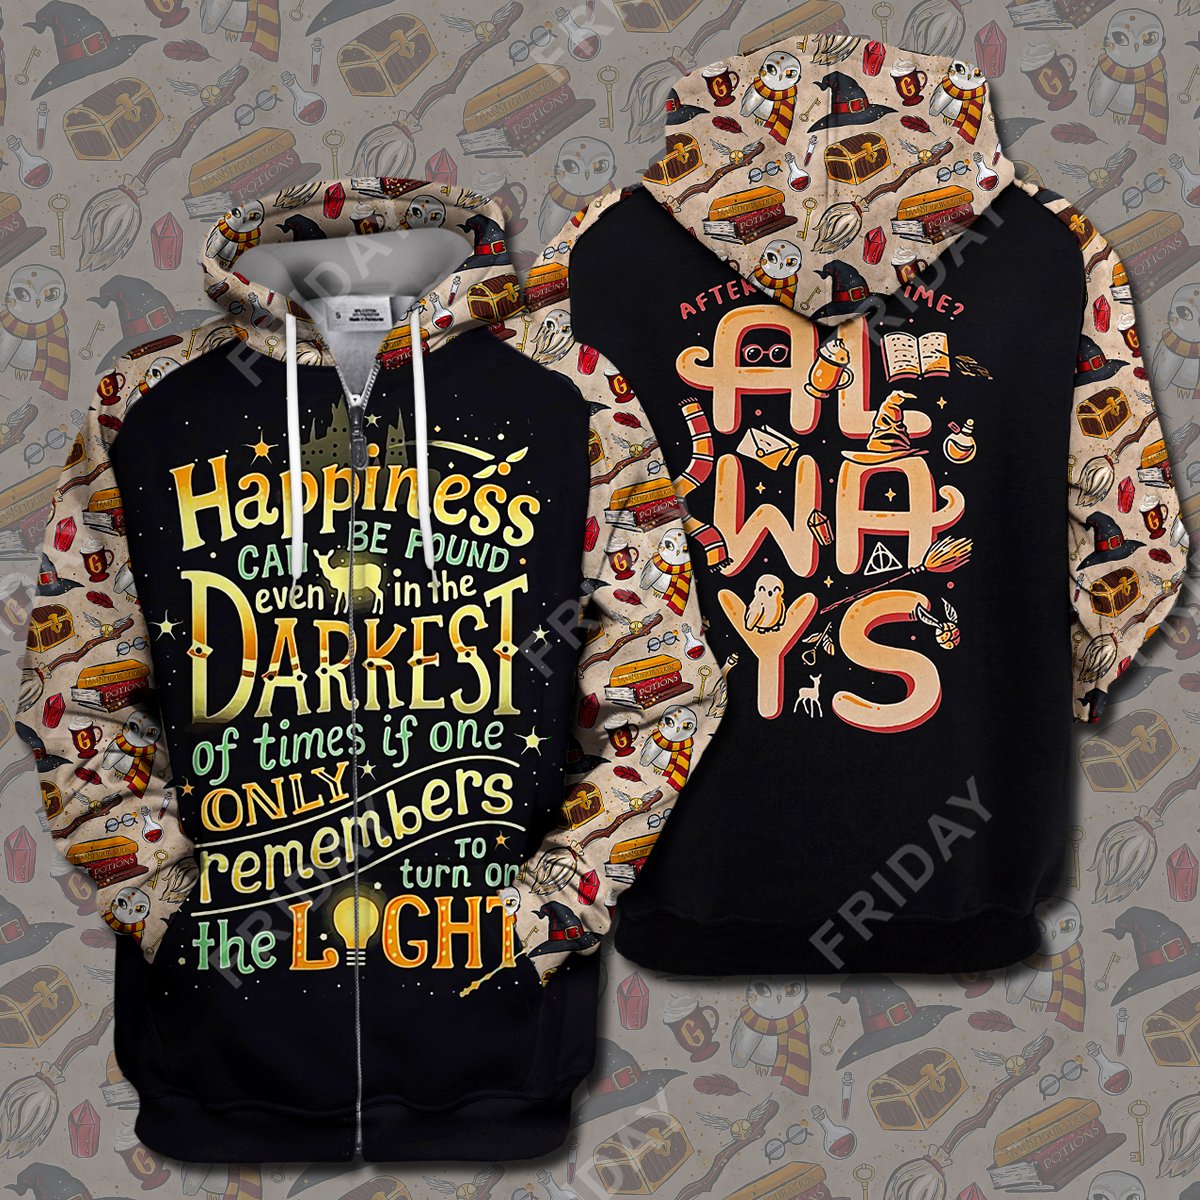 Unifinz HP T-shirt Happiness Can Be Found Even In The Darkest T-shirt Awesome High Quality HP Hoodie Sweater Tank 2026